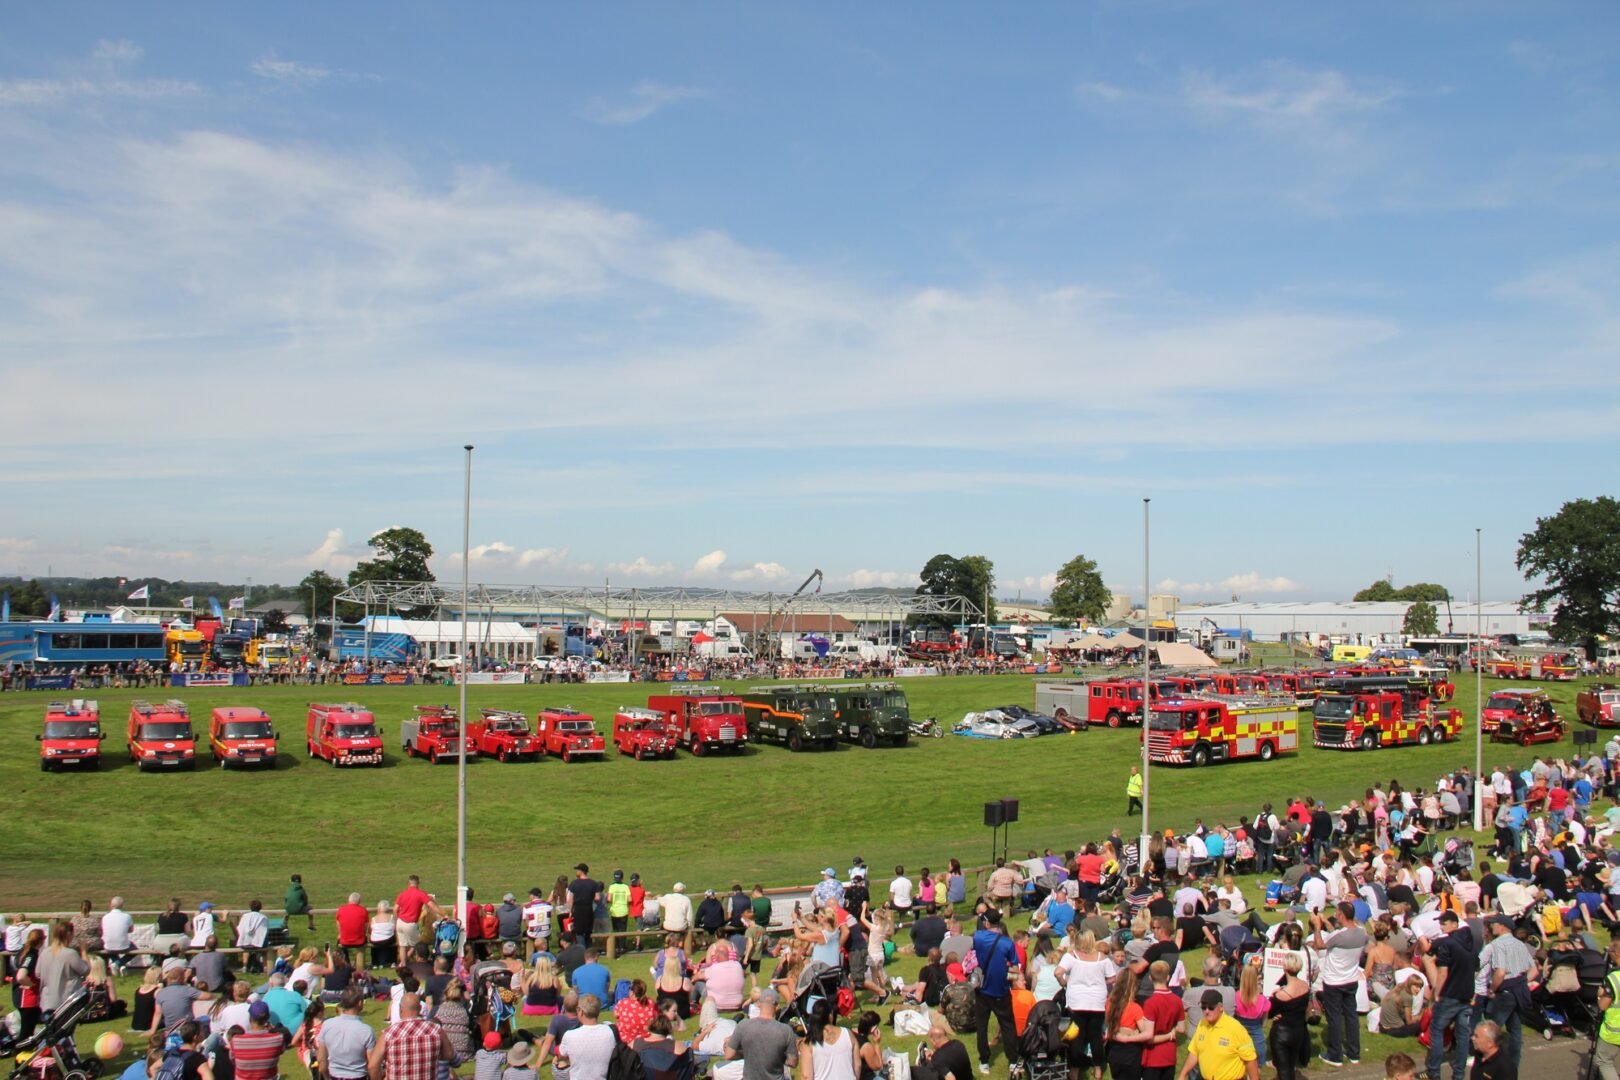 Fire Engines at Truckfest 